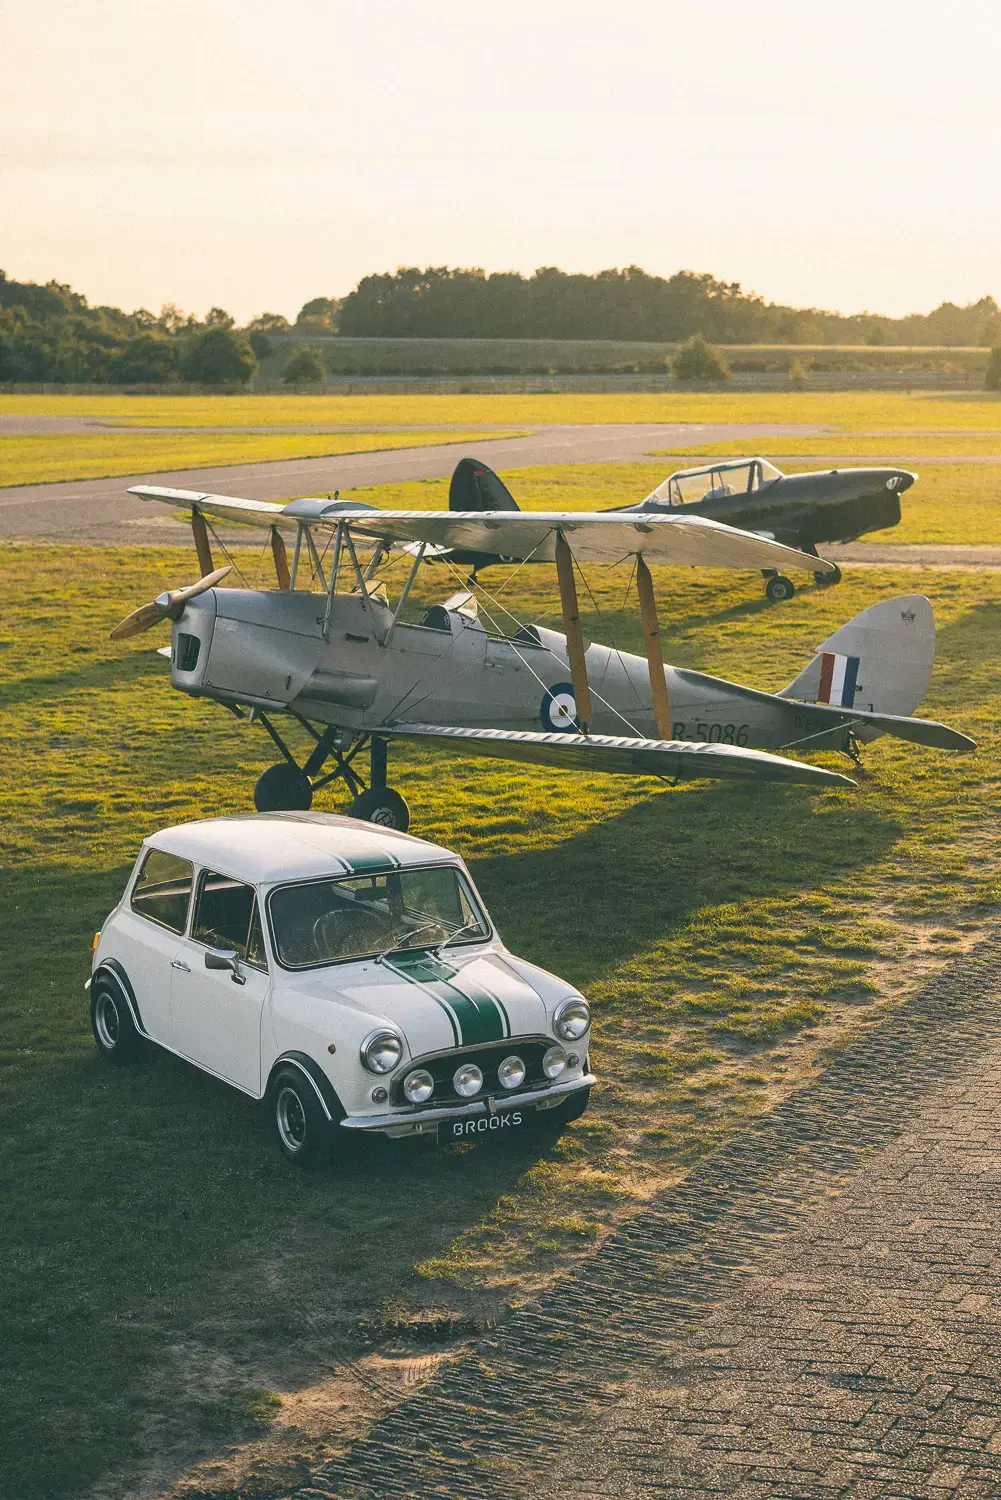 brooks mini classic with a Tiger moth and chipmunk airplane in the background. standing on an open grass field at airport seppe breda